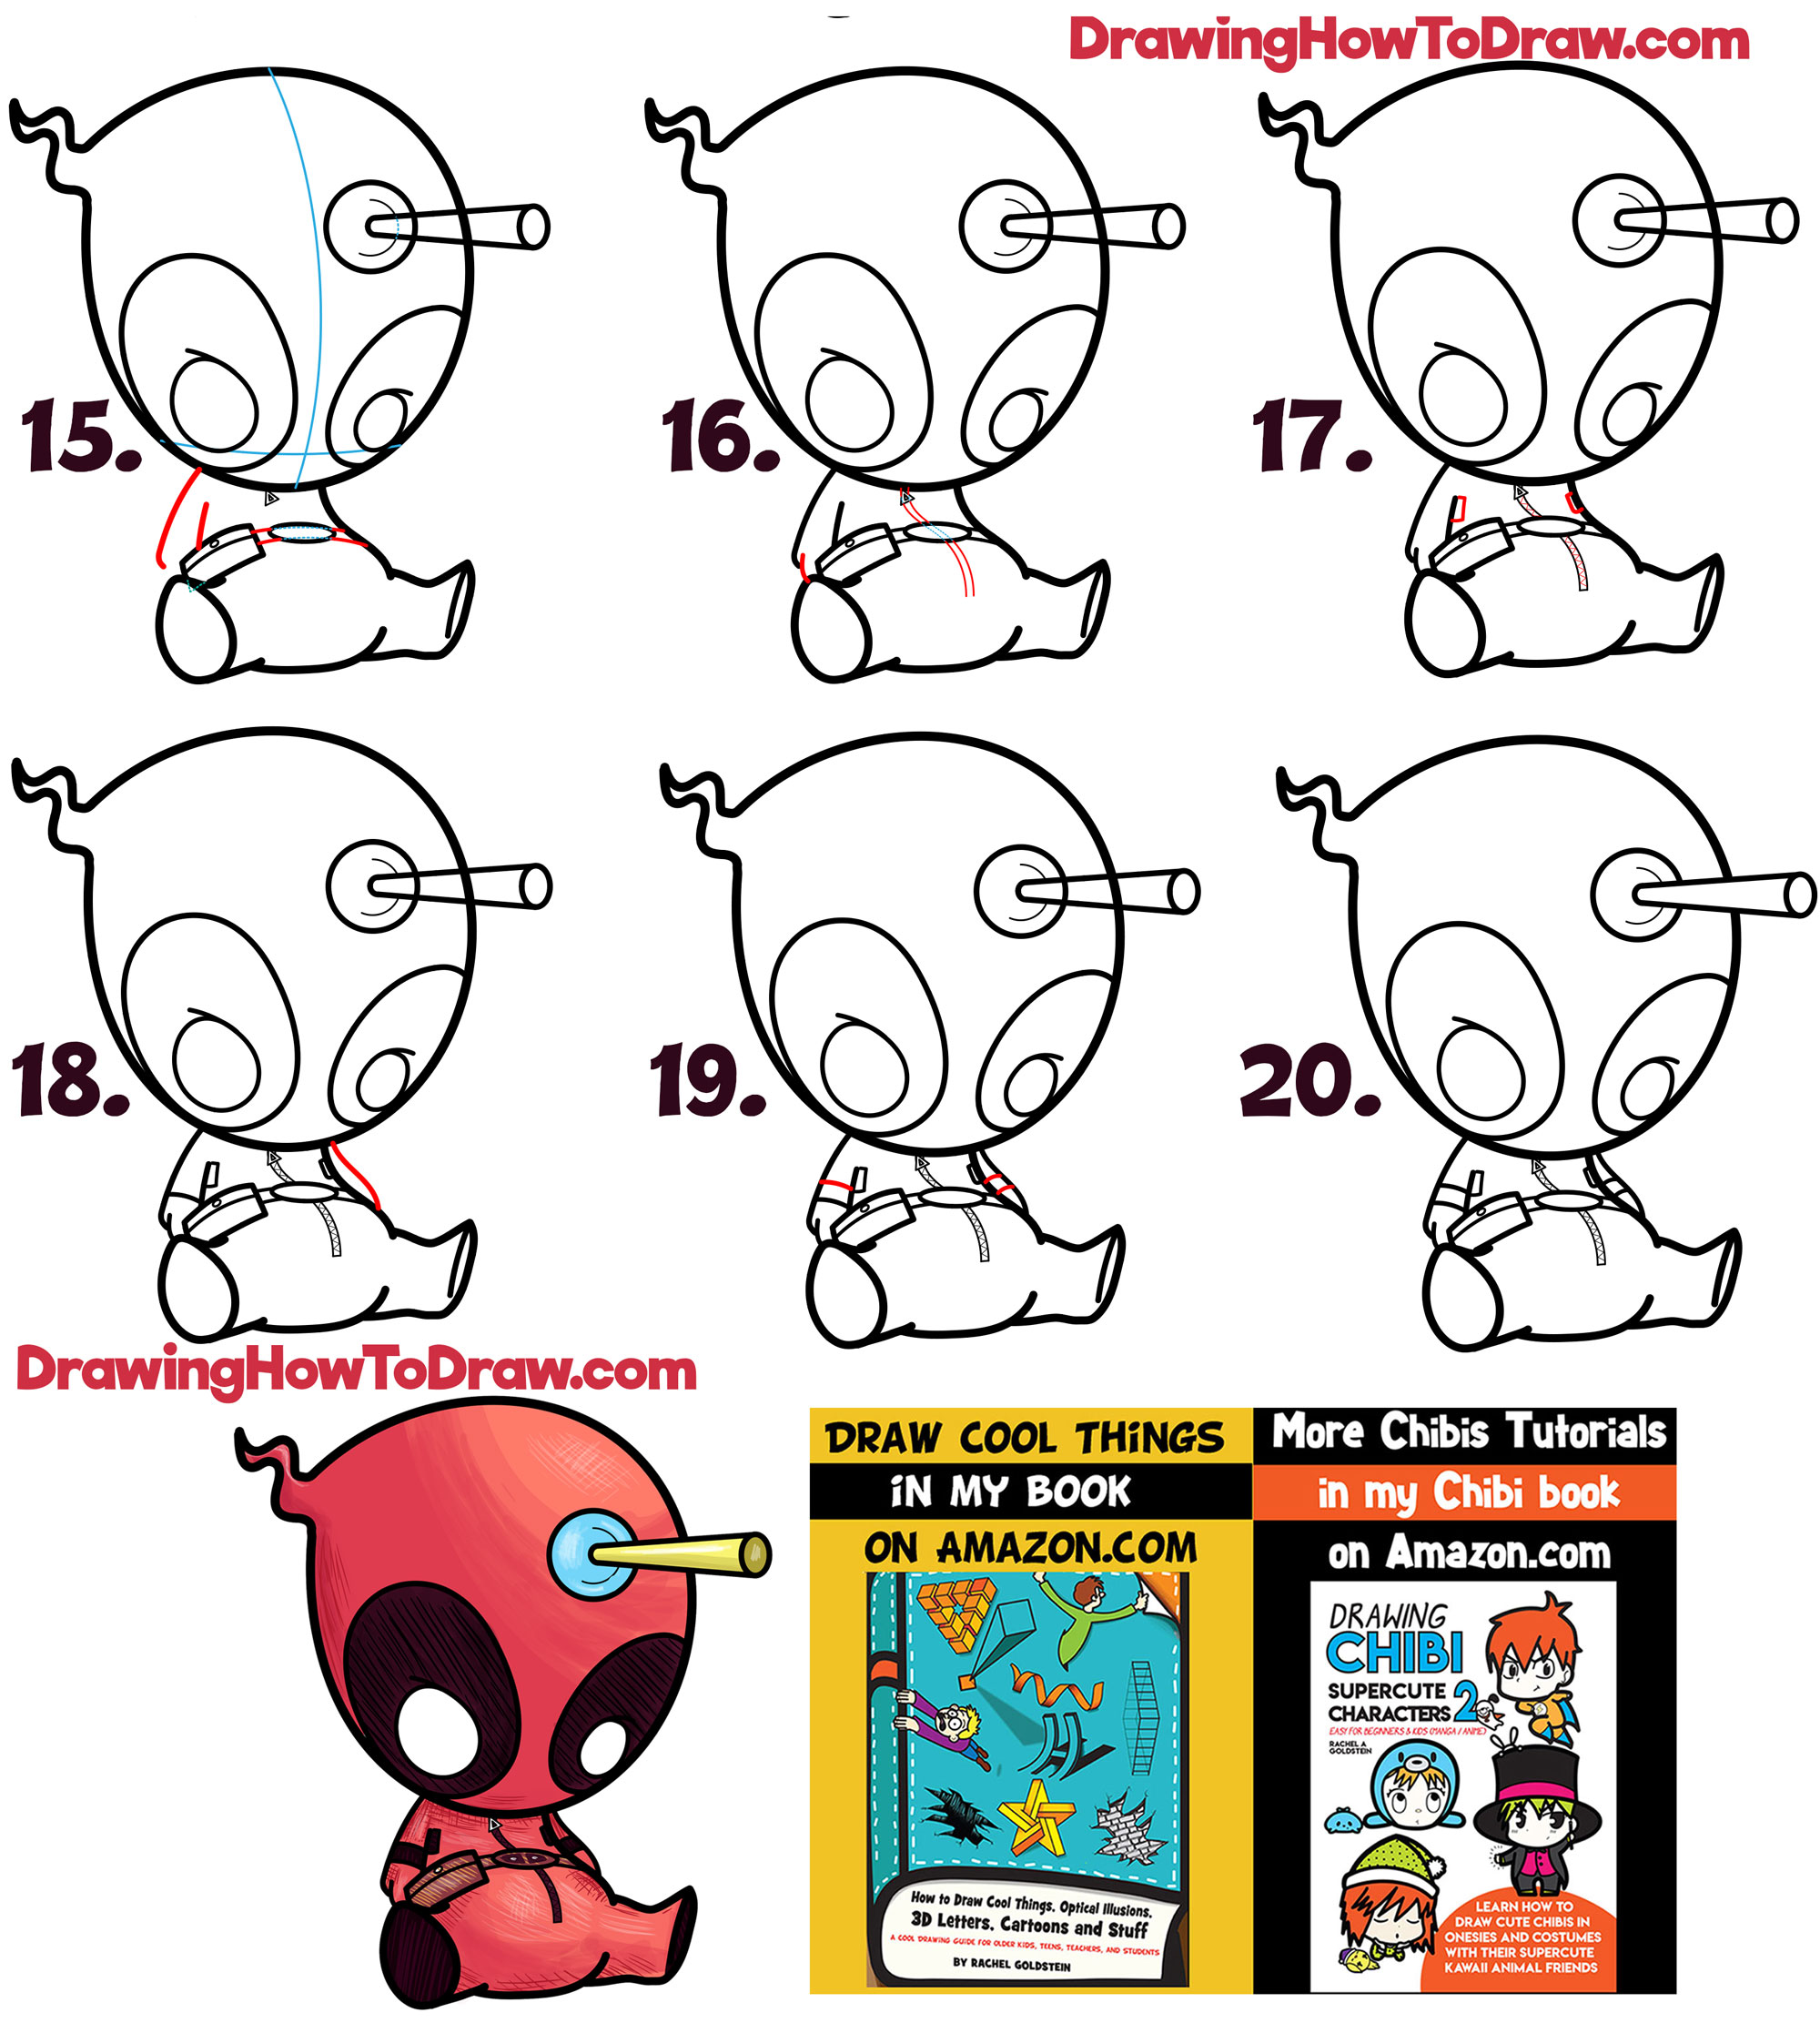 How to Draw Cute Cartoon / Chibi Deadpool Easy Step by Step Drawing